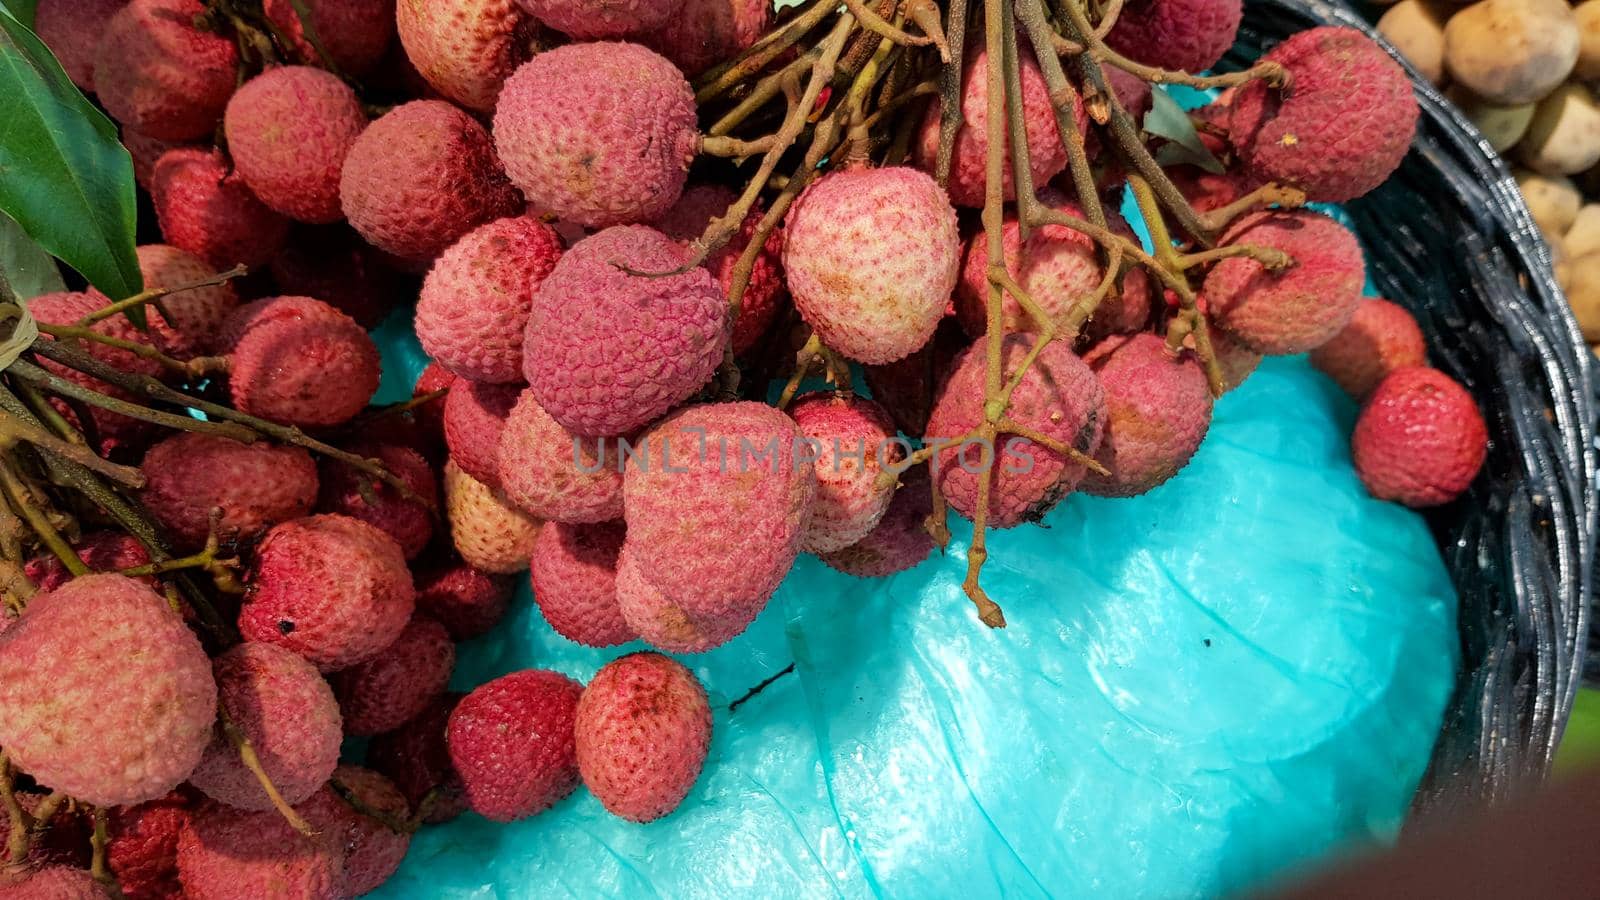 Red lychees are placed for sale in a shop in Thailand. by pichai25